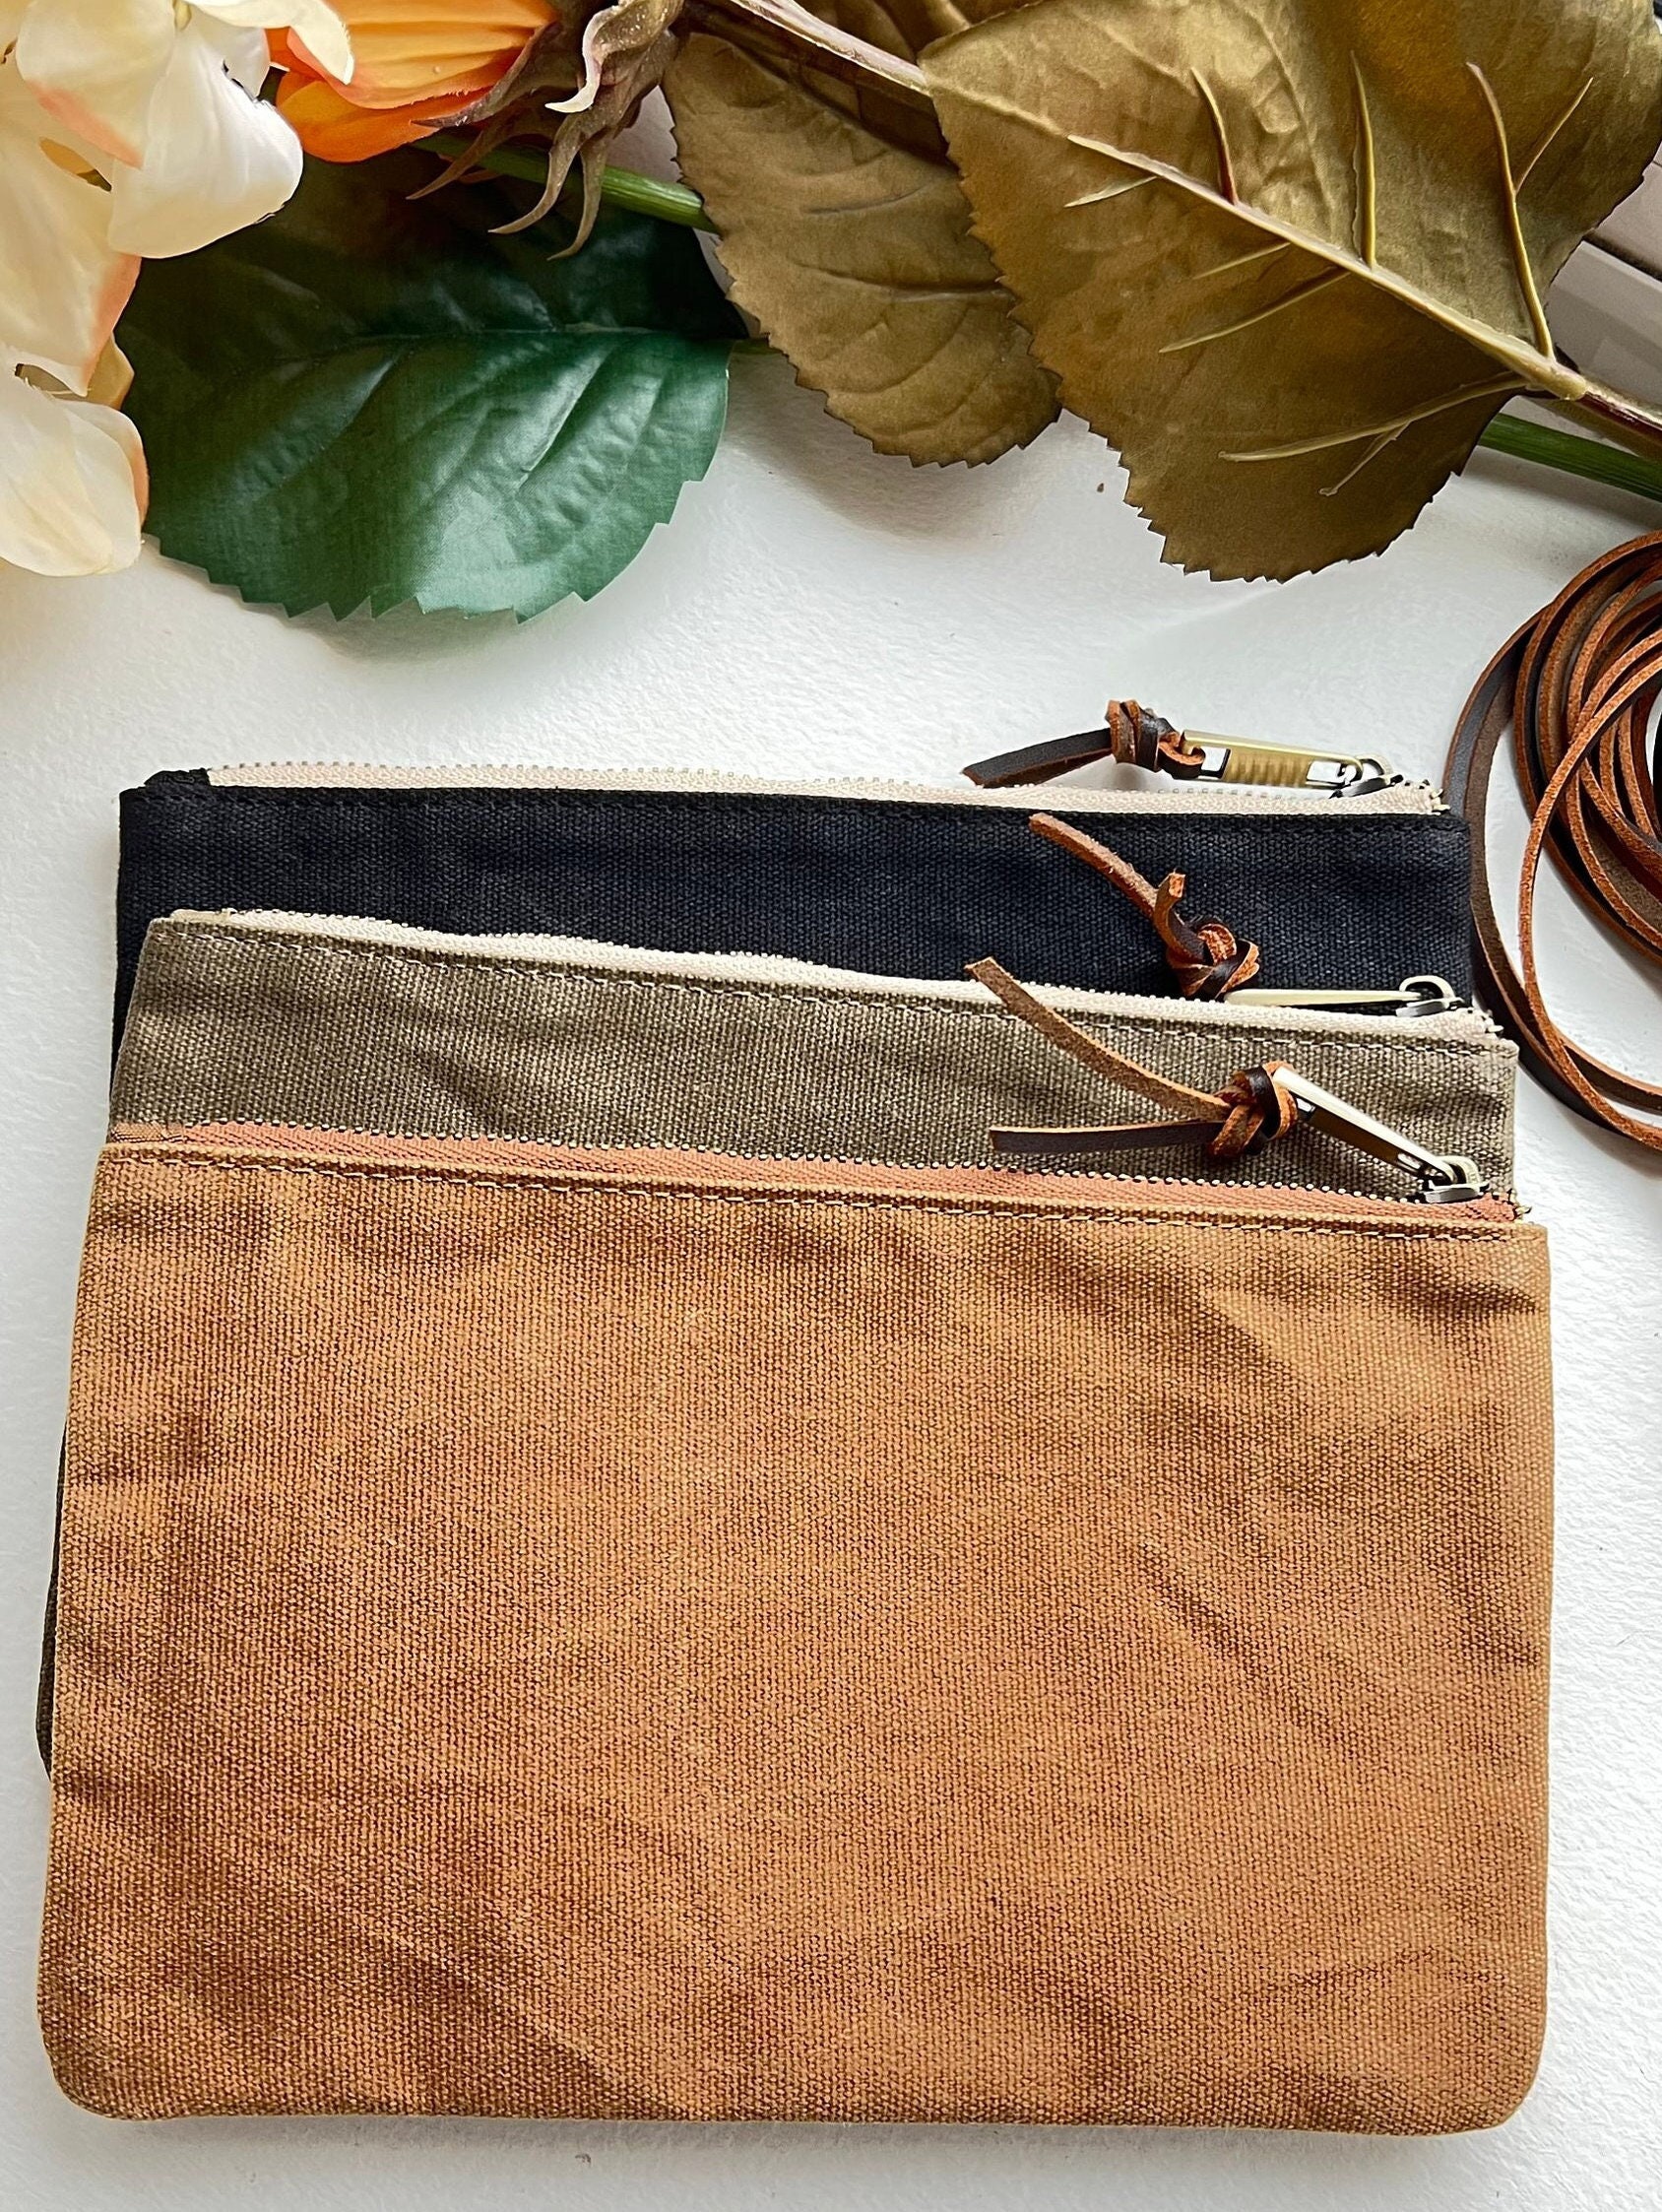 Waxed Canvas Fabric, 8oz, Water Resistant, Waterproof Fabric, Hand